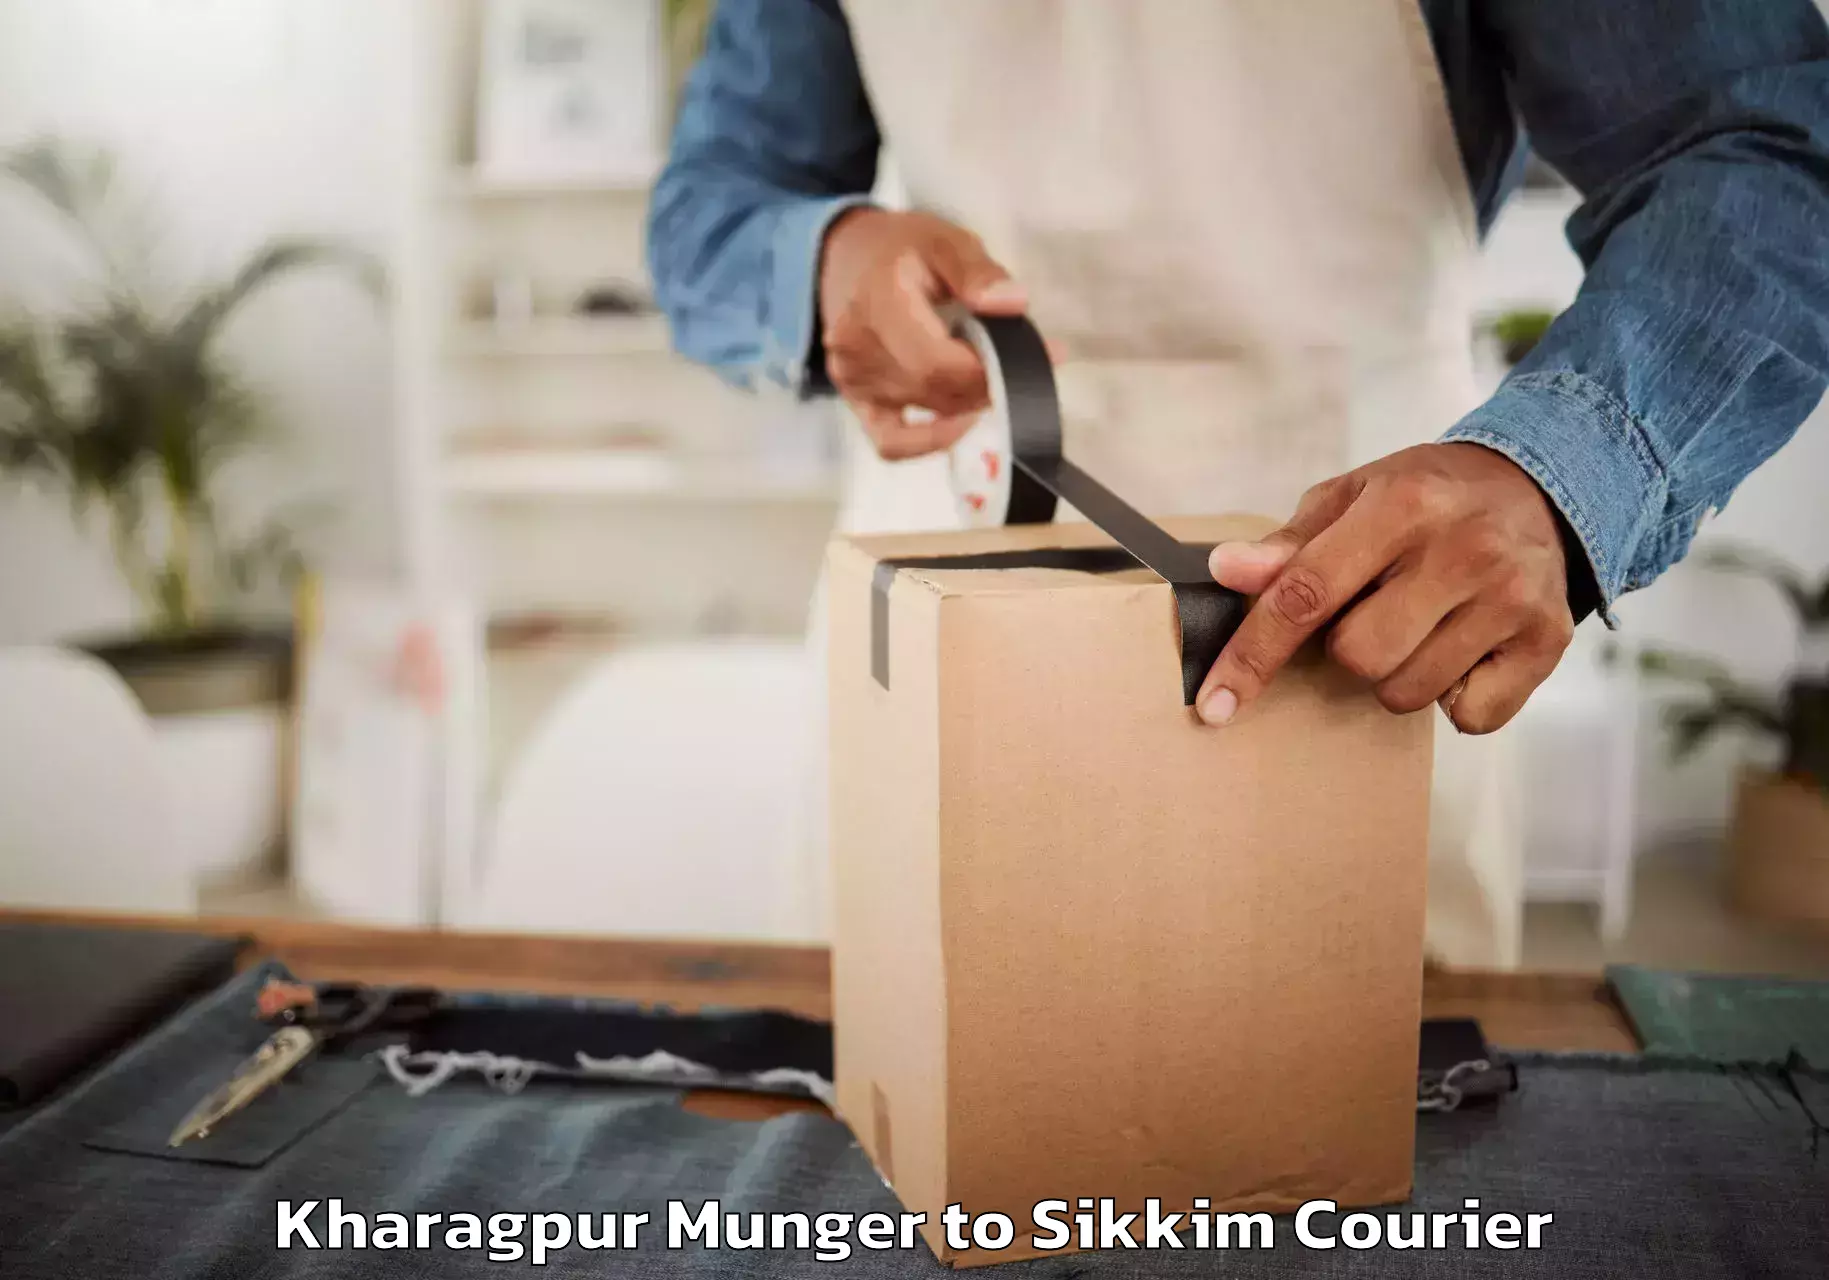 Trusted moving company Kharagpur Munger to Geyzing